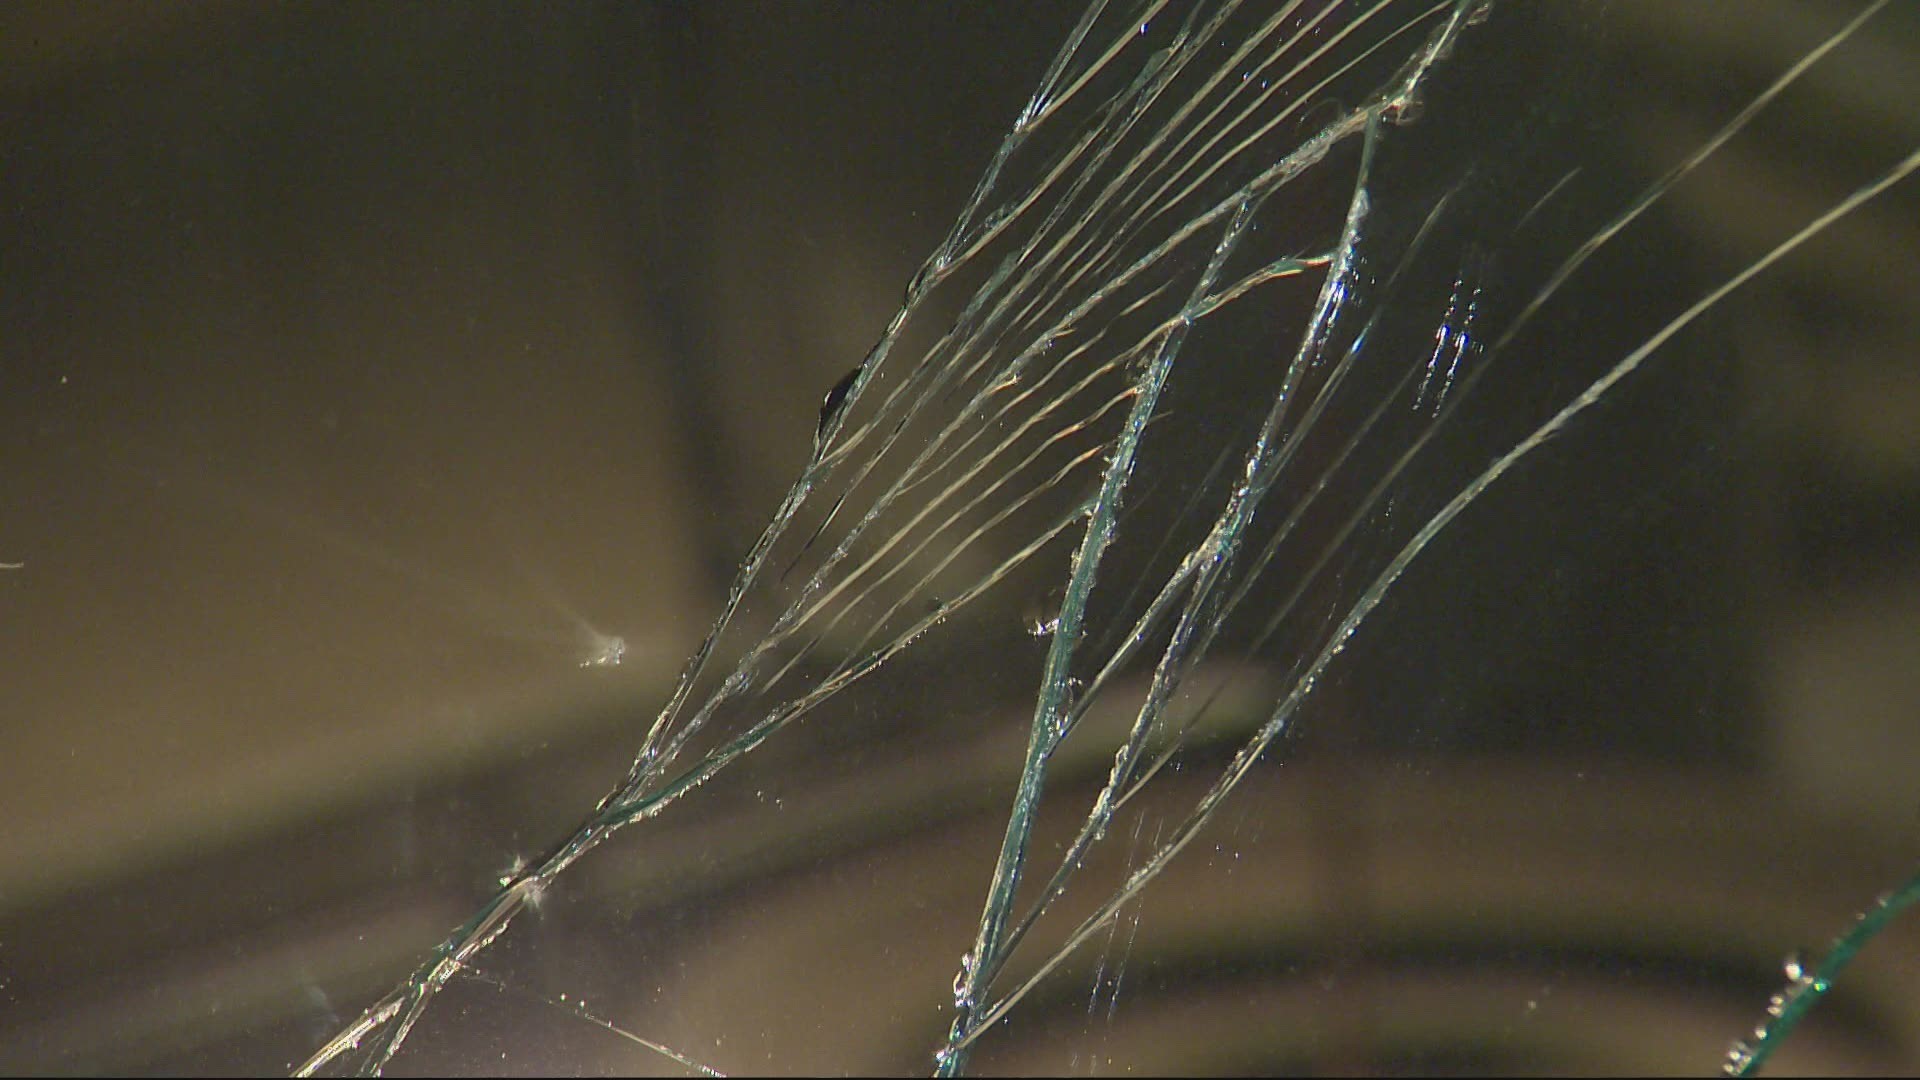 The riot was declared after people started smashing windows in Northwest Portland's Nob Hill neighborhood.